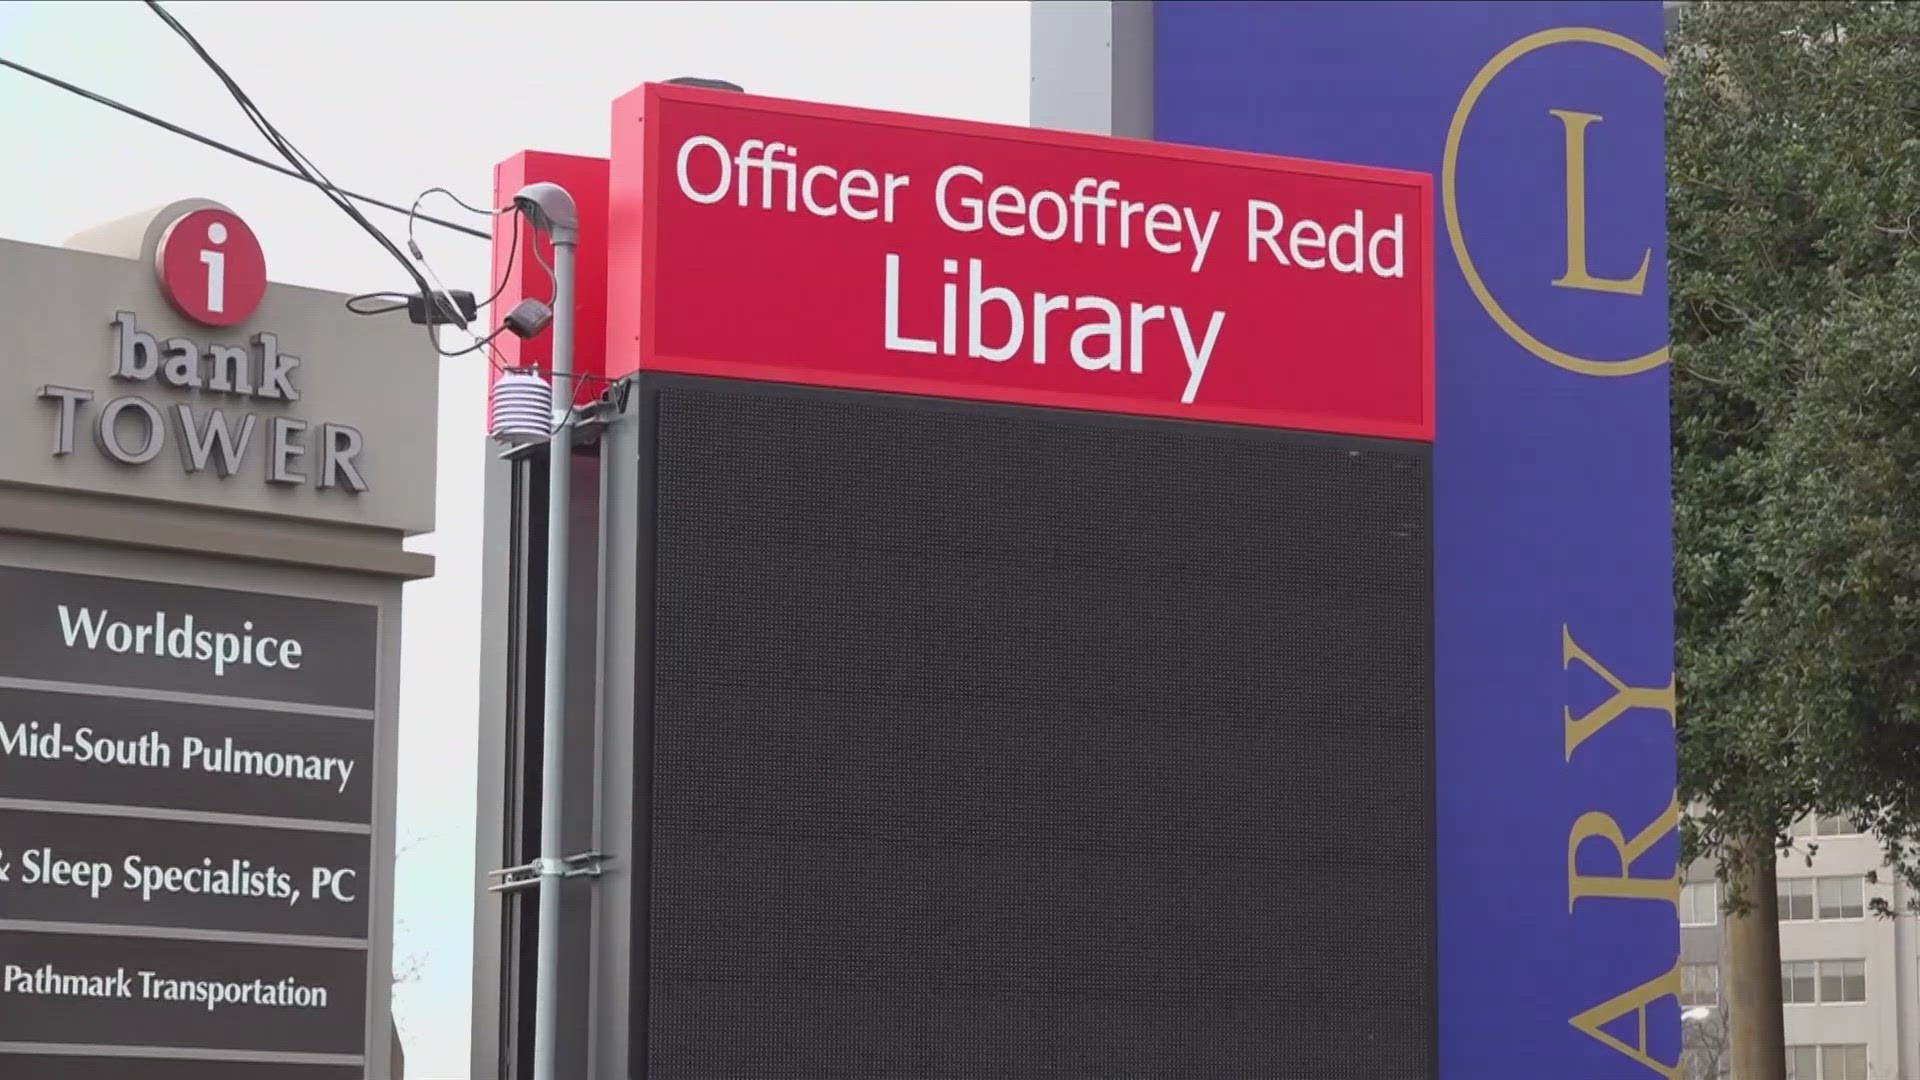 Officer Geoffrey Redd was shot and killed at the White Station branch library in February, 2023. Wednesday, that library was renamed in his honor.